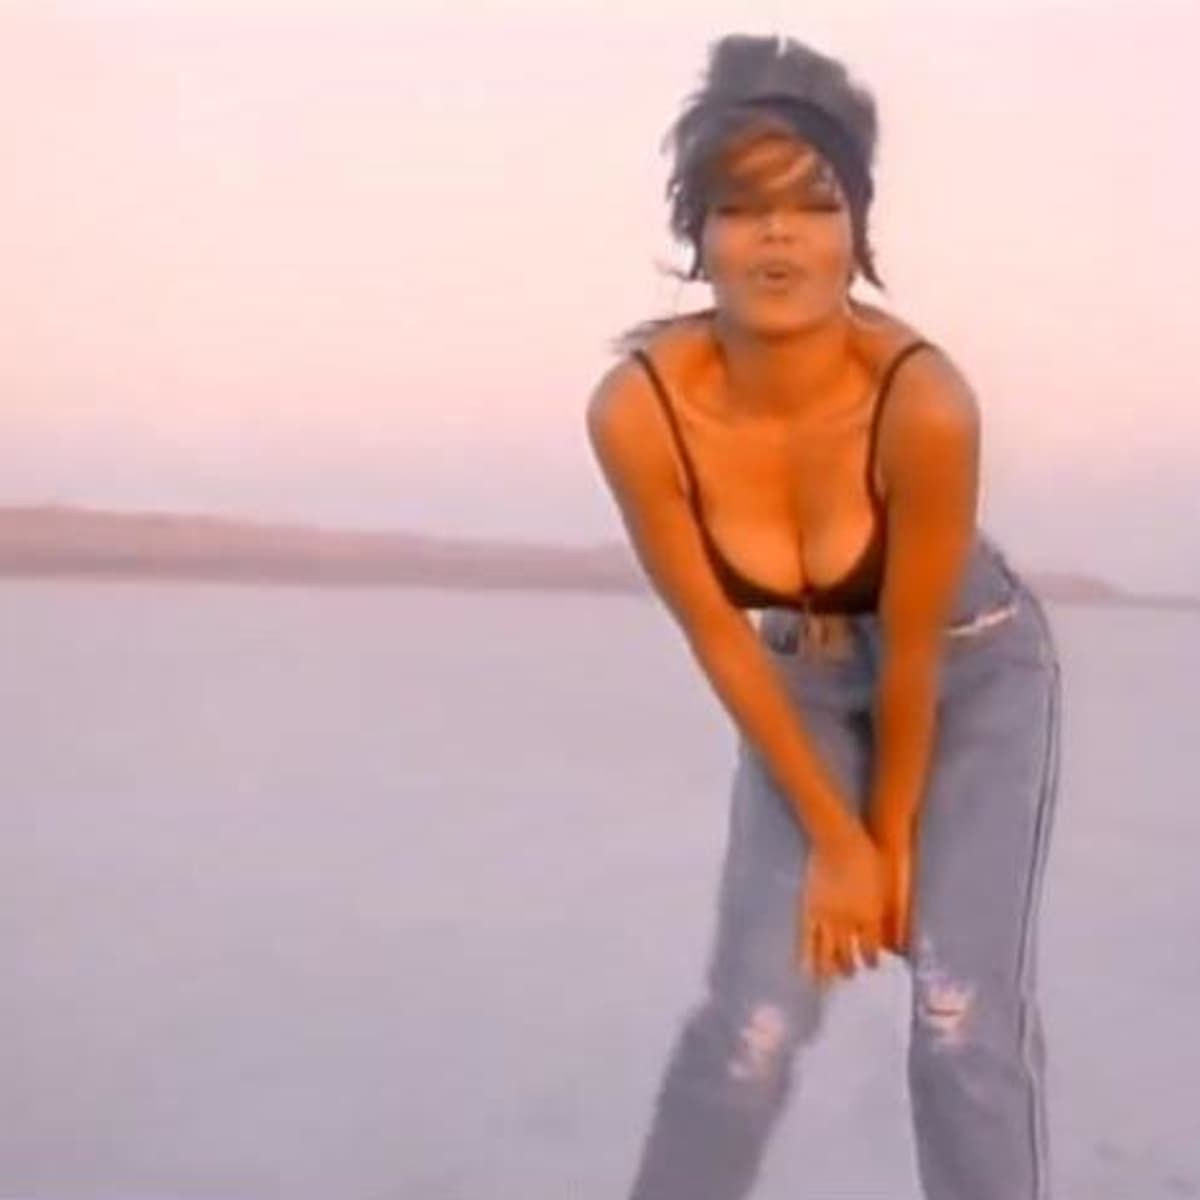 Bra Penty X Vedio Sleeping Brother - The 50 Sexiest Music Videos of the '90s - Spinditty